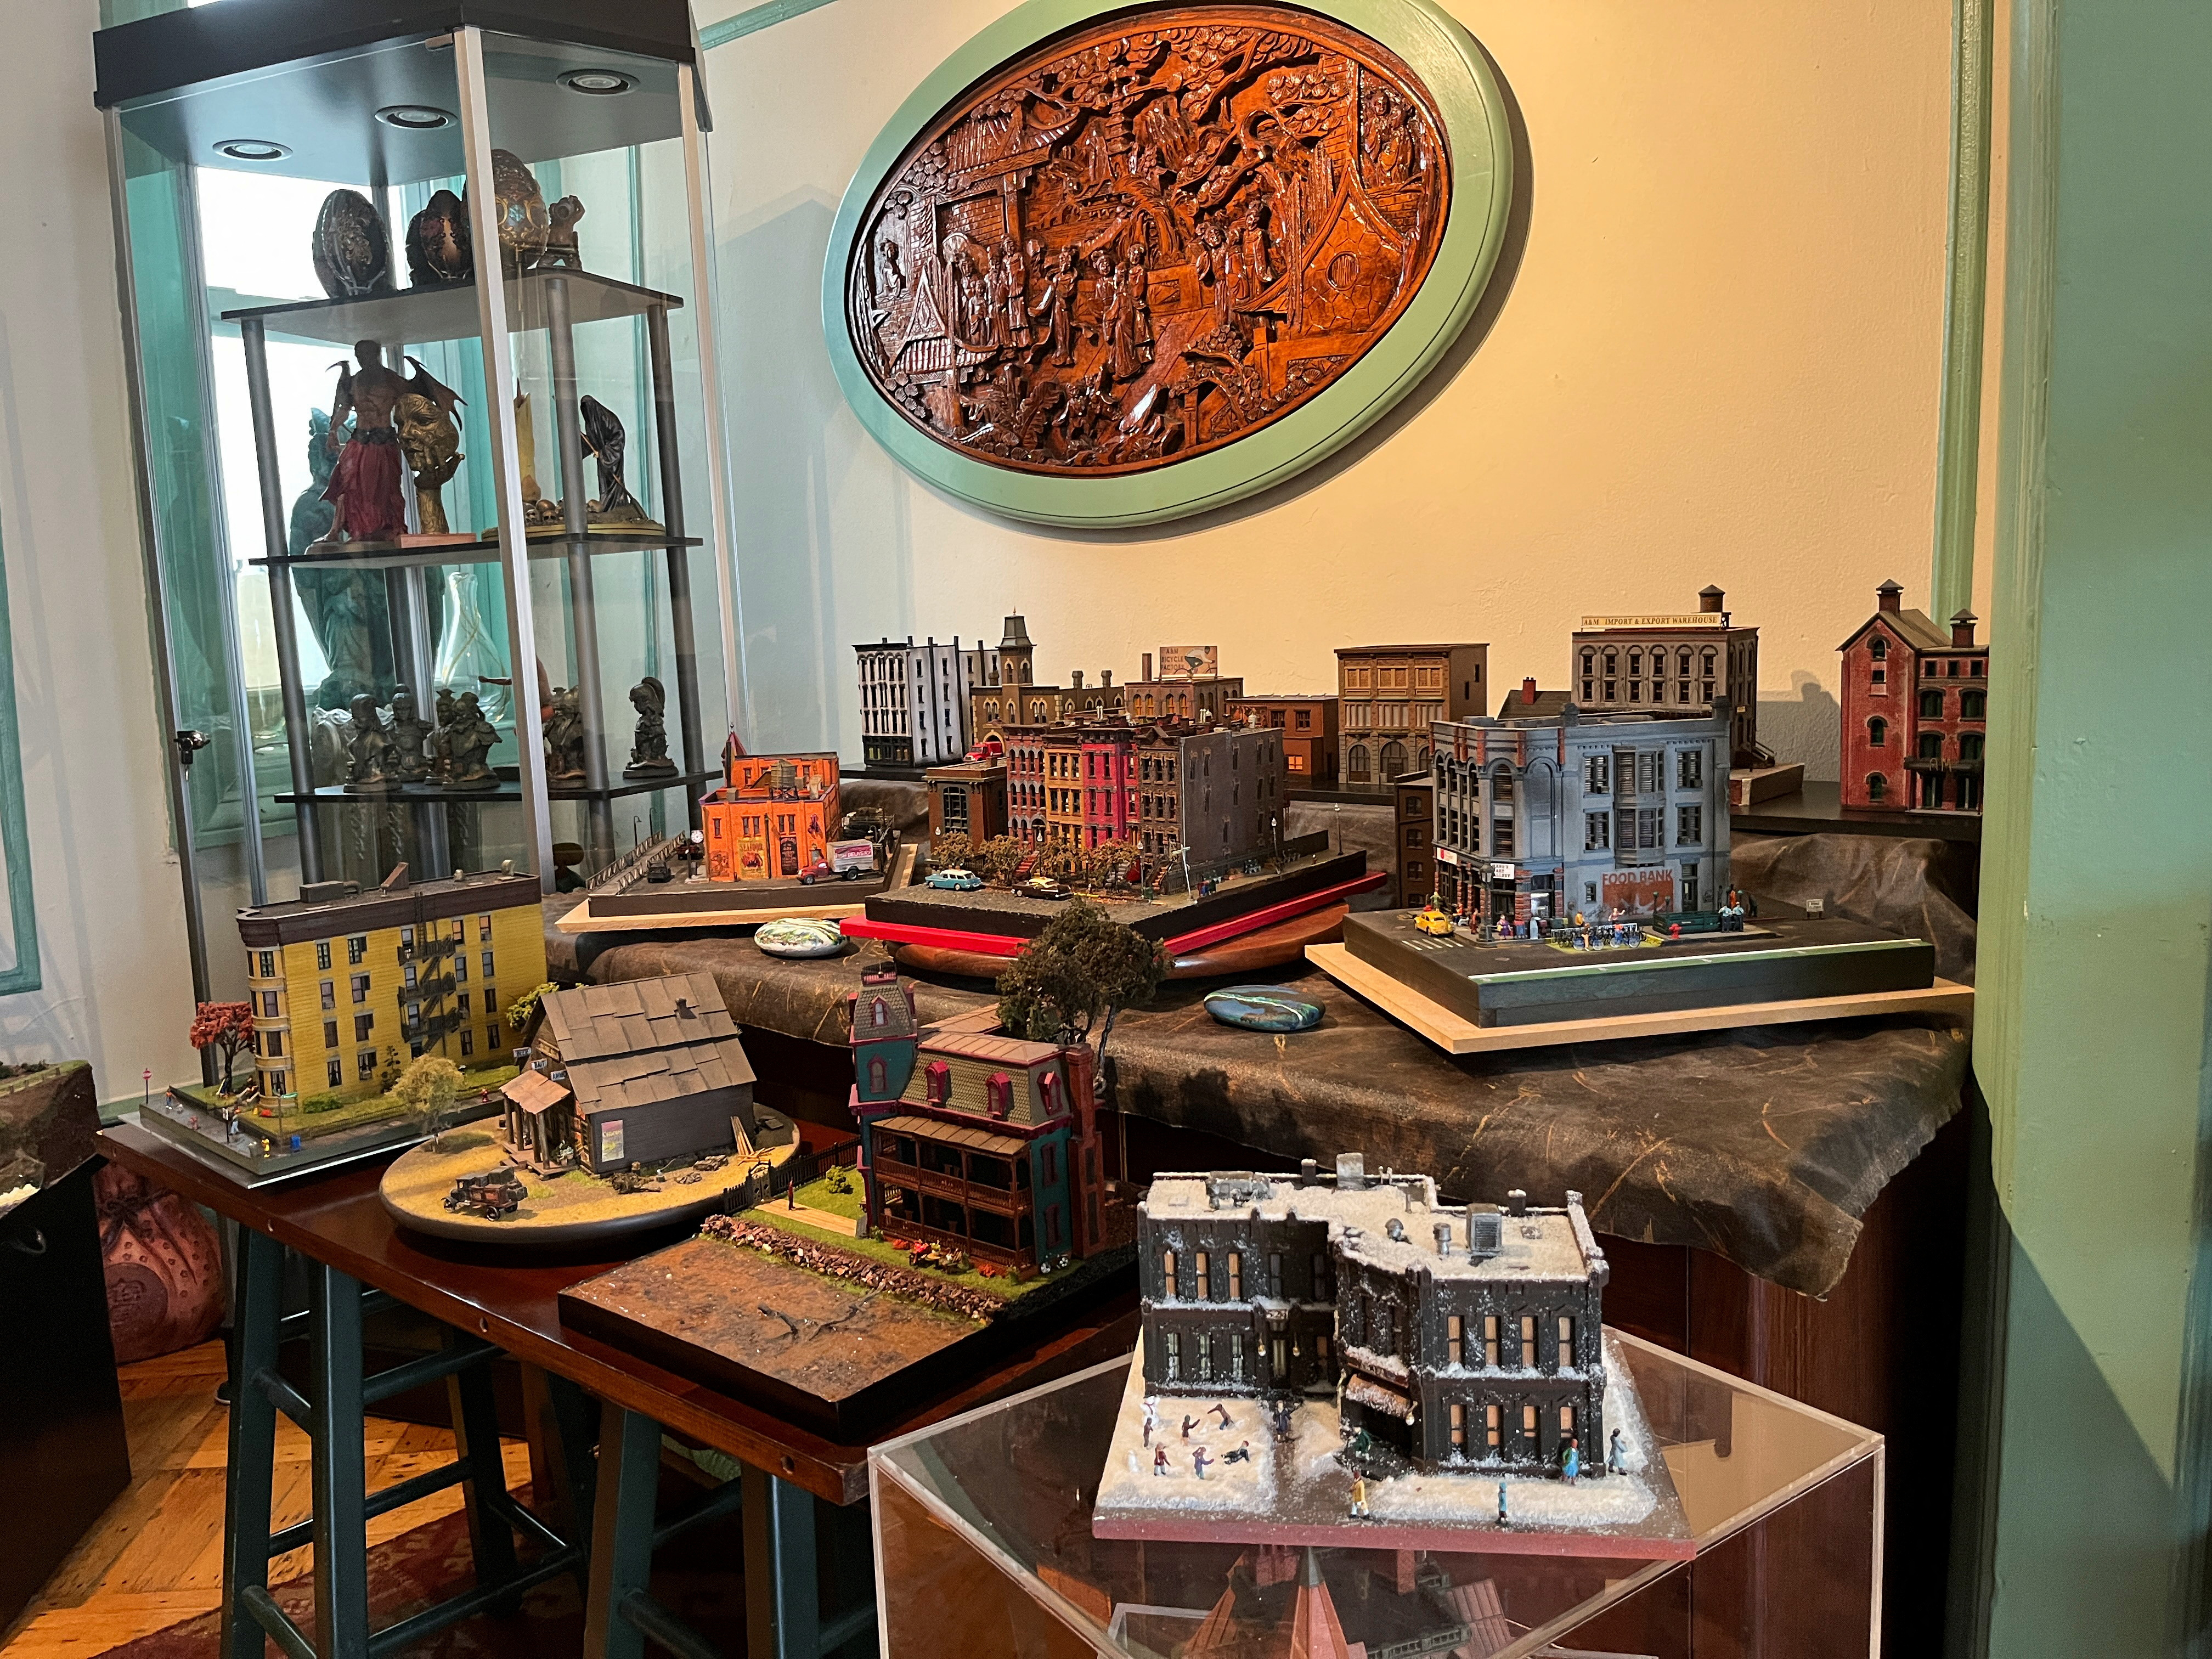 Aaron Kinard's dioramas of mostly urban life, created during the pandemic, are displayed at his home in Brooklyn